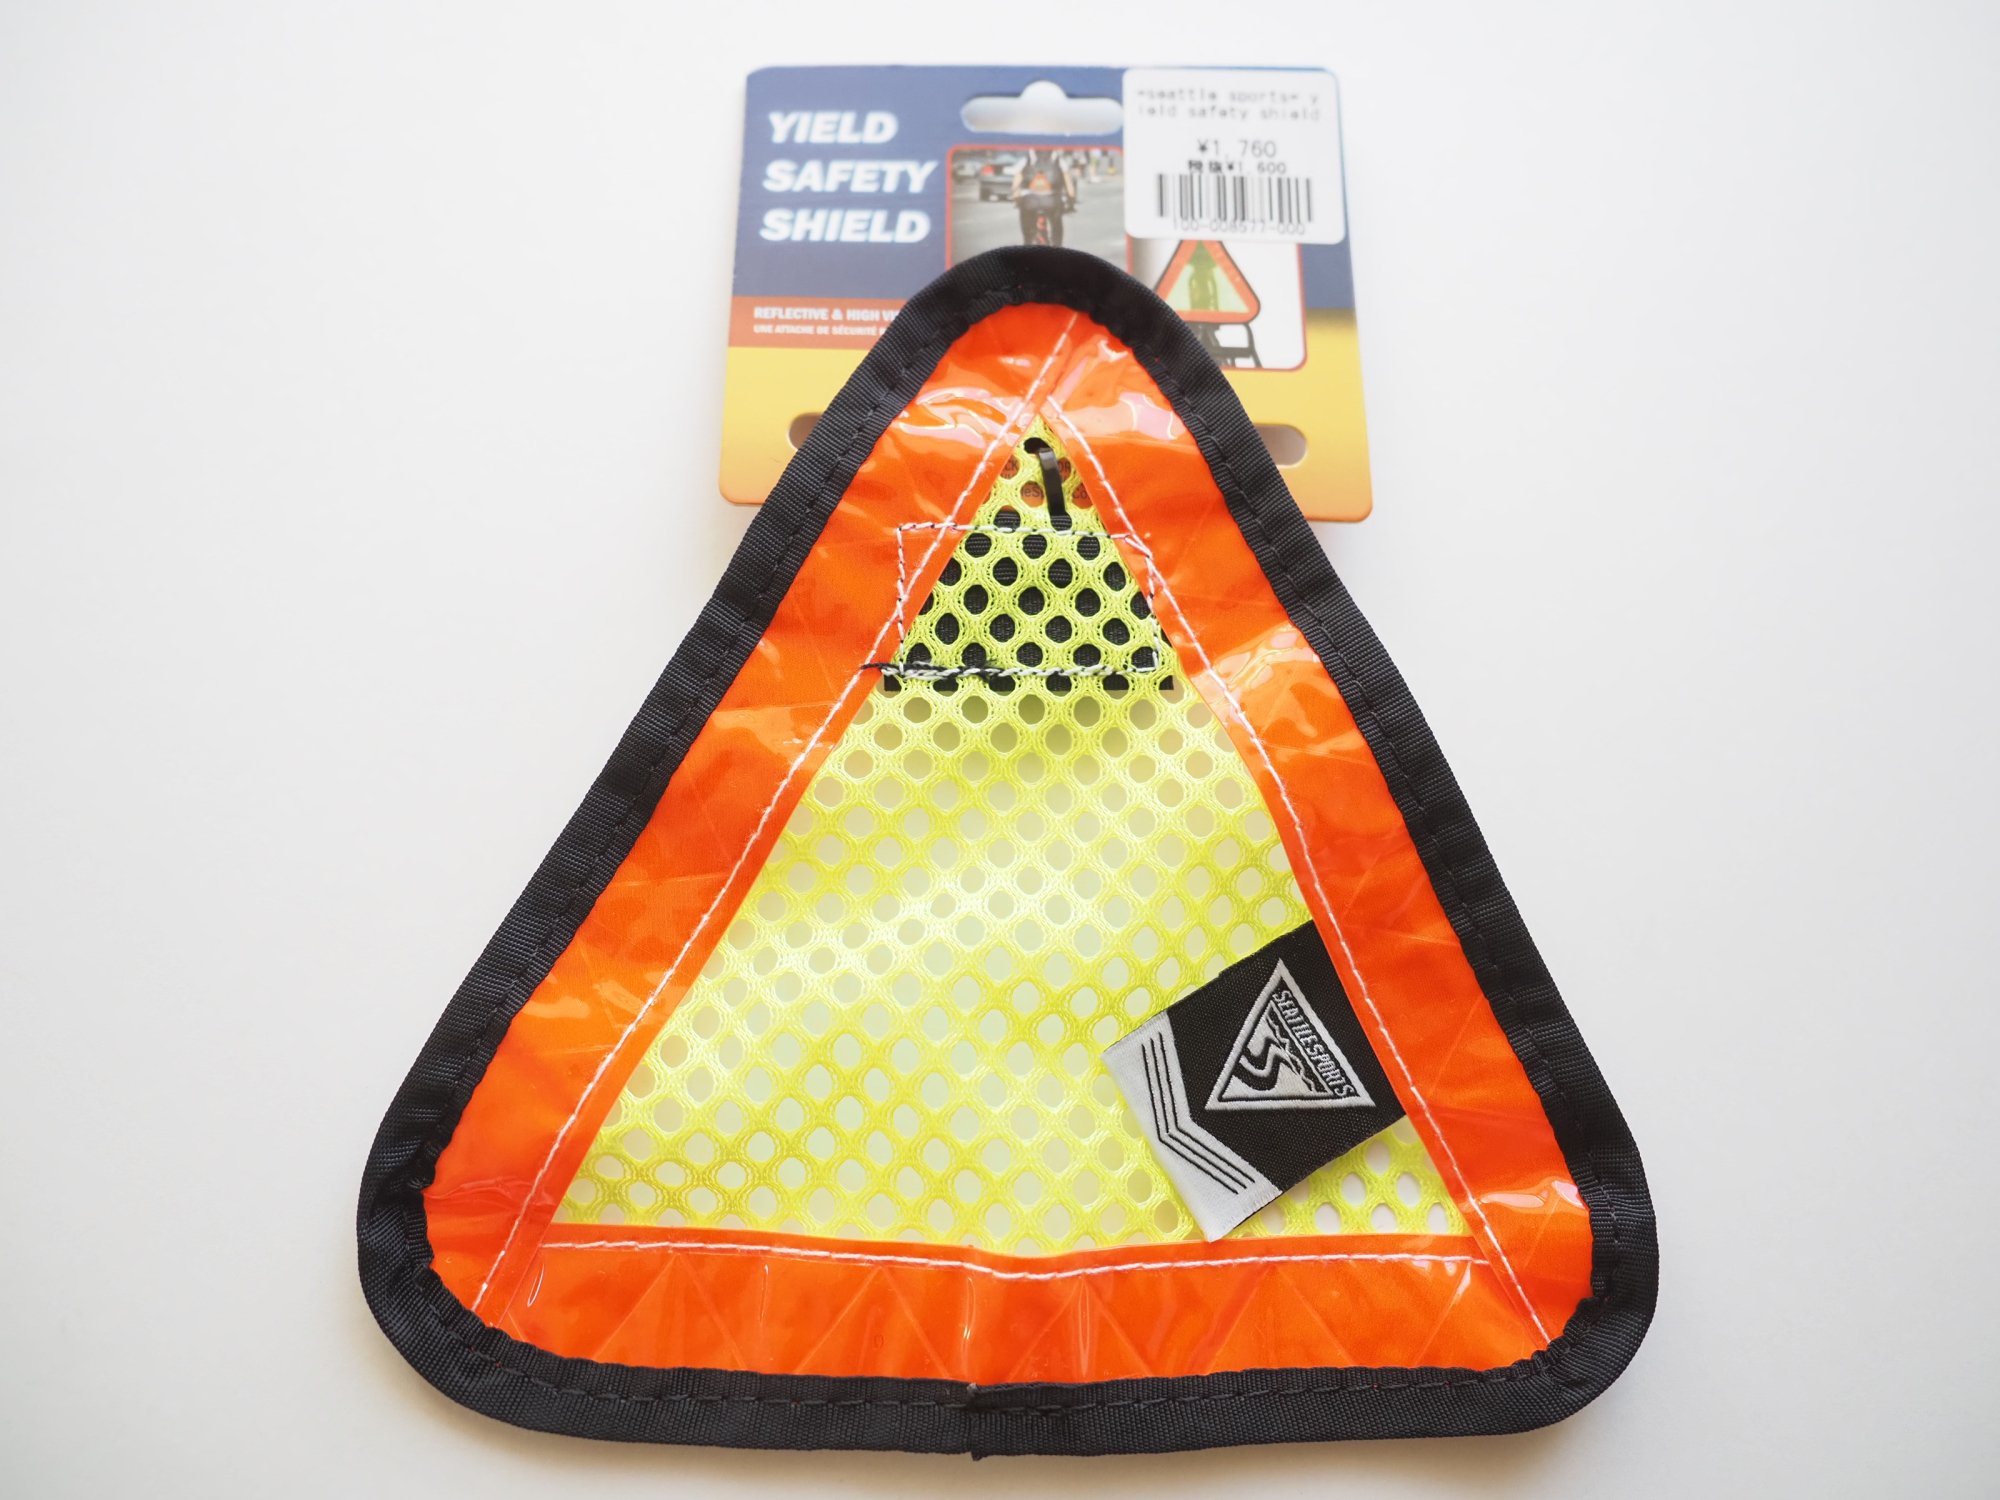 <img class='new_mark_img1' src='https://img.shop-pro.jp/img/new/icons14.gif' style='border:none;display:inline;margin:0px;padding:0px;width:auto;' />SEATTLE SPORTS yield safety shield